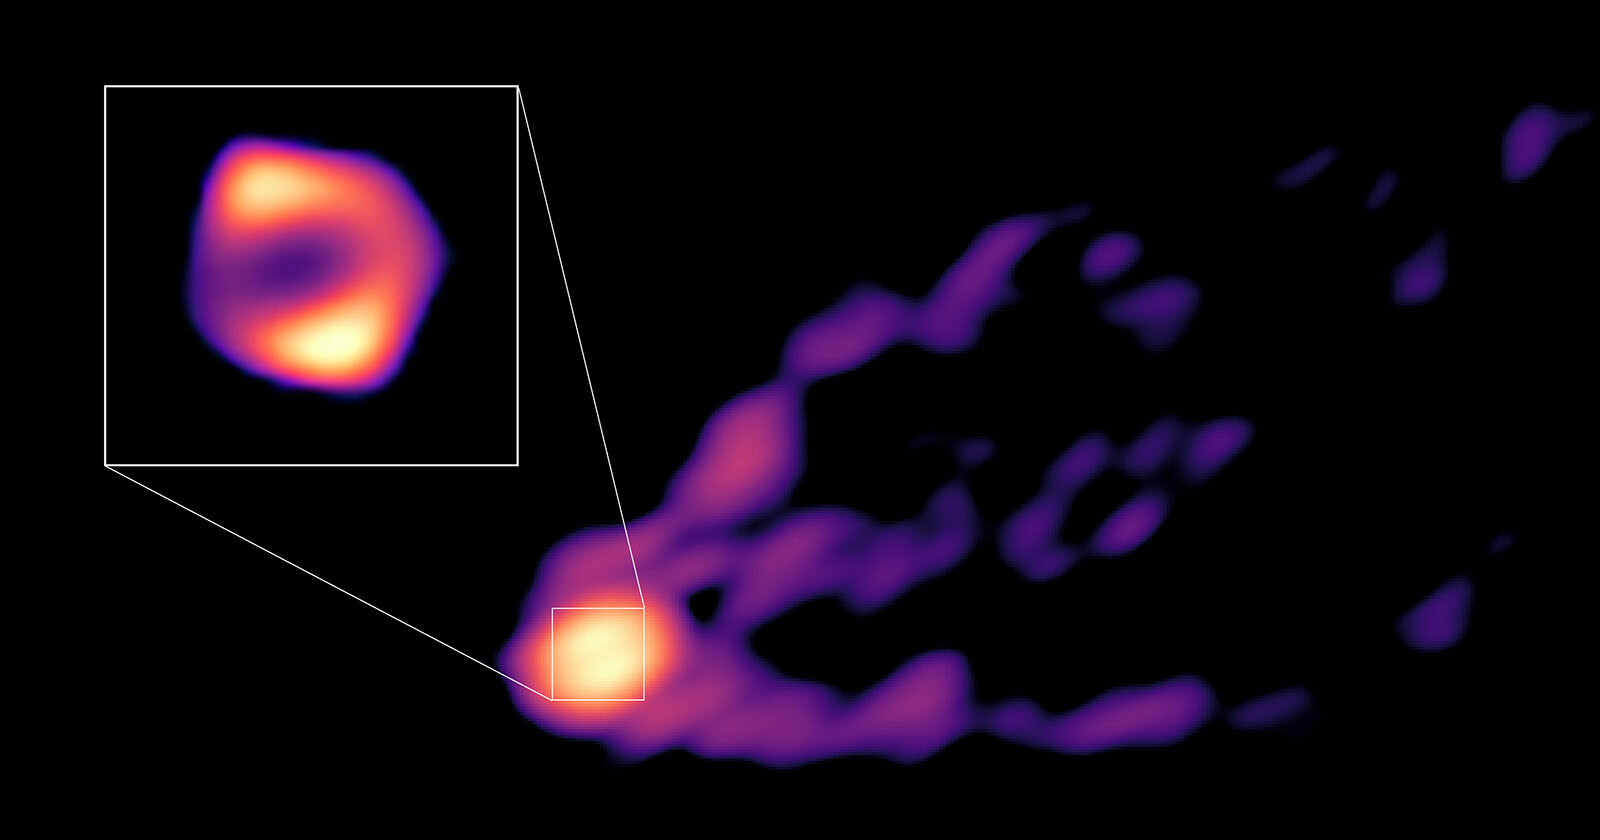 New Wide-Angle Image Shows the Power of Supermassive Black Hole